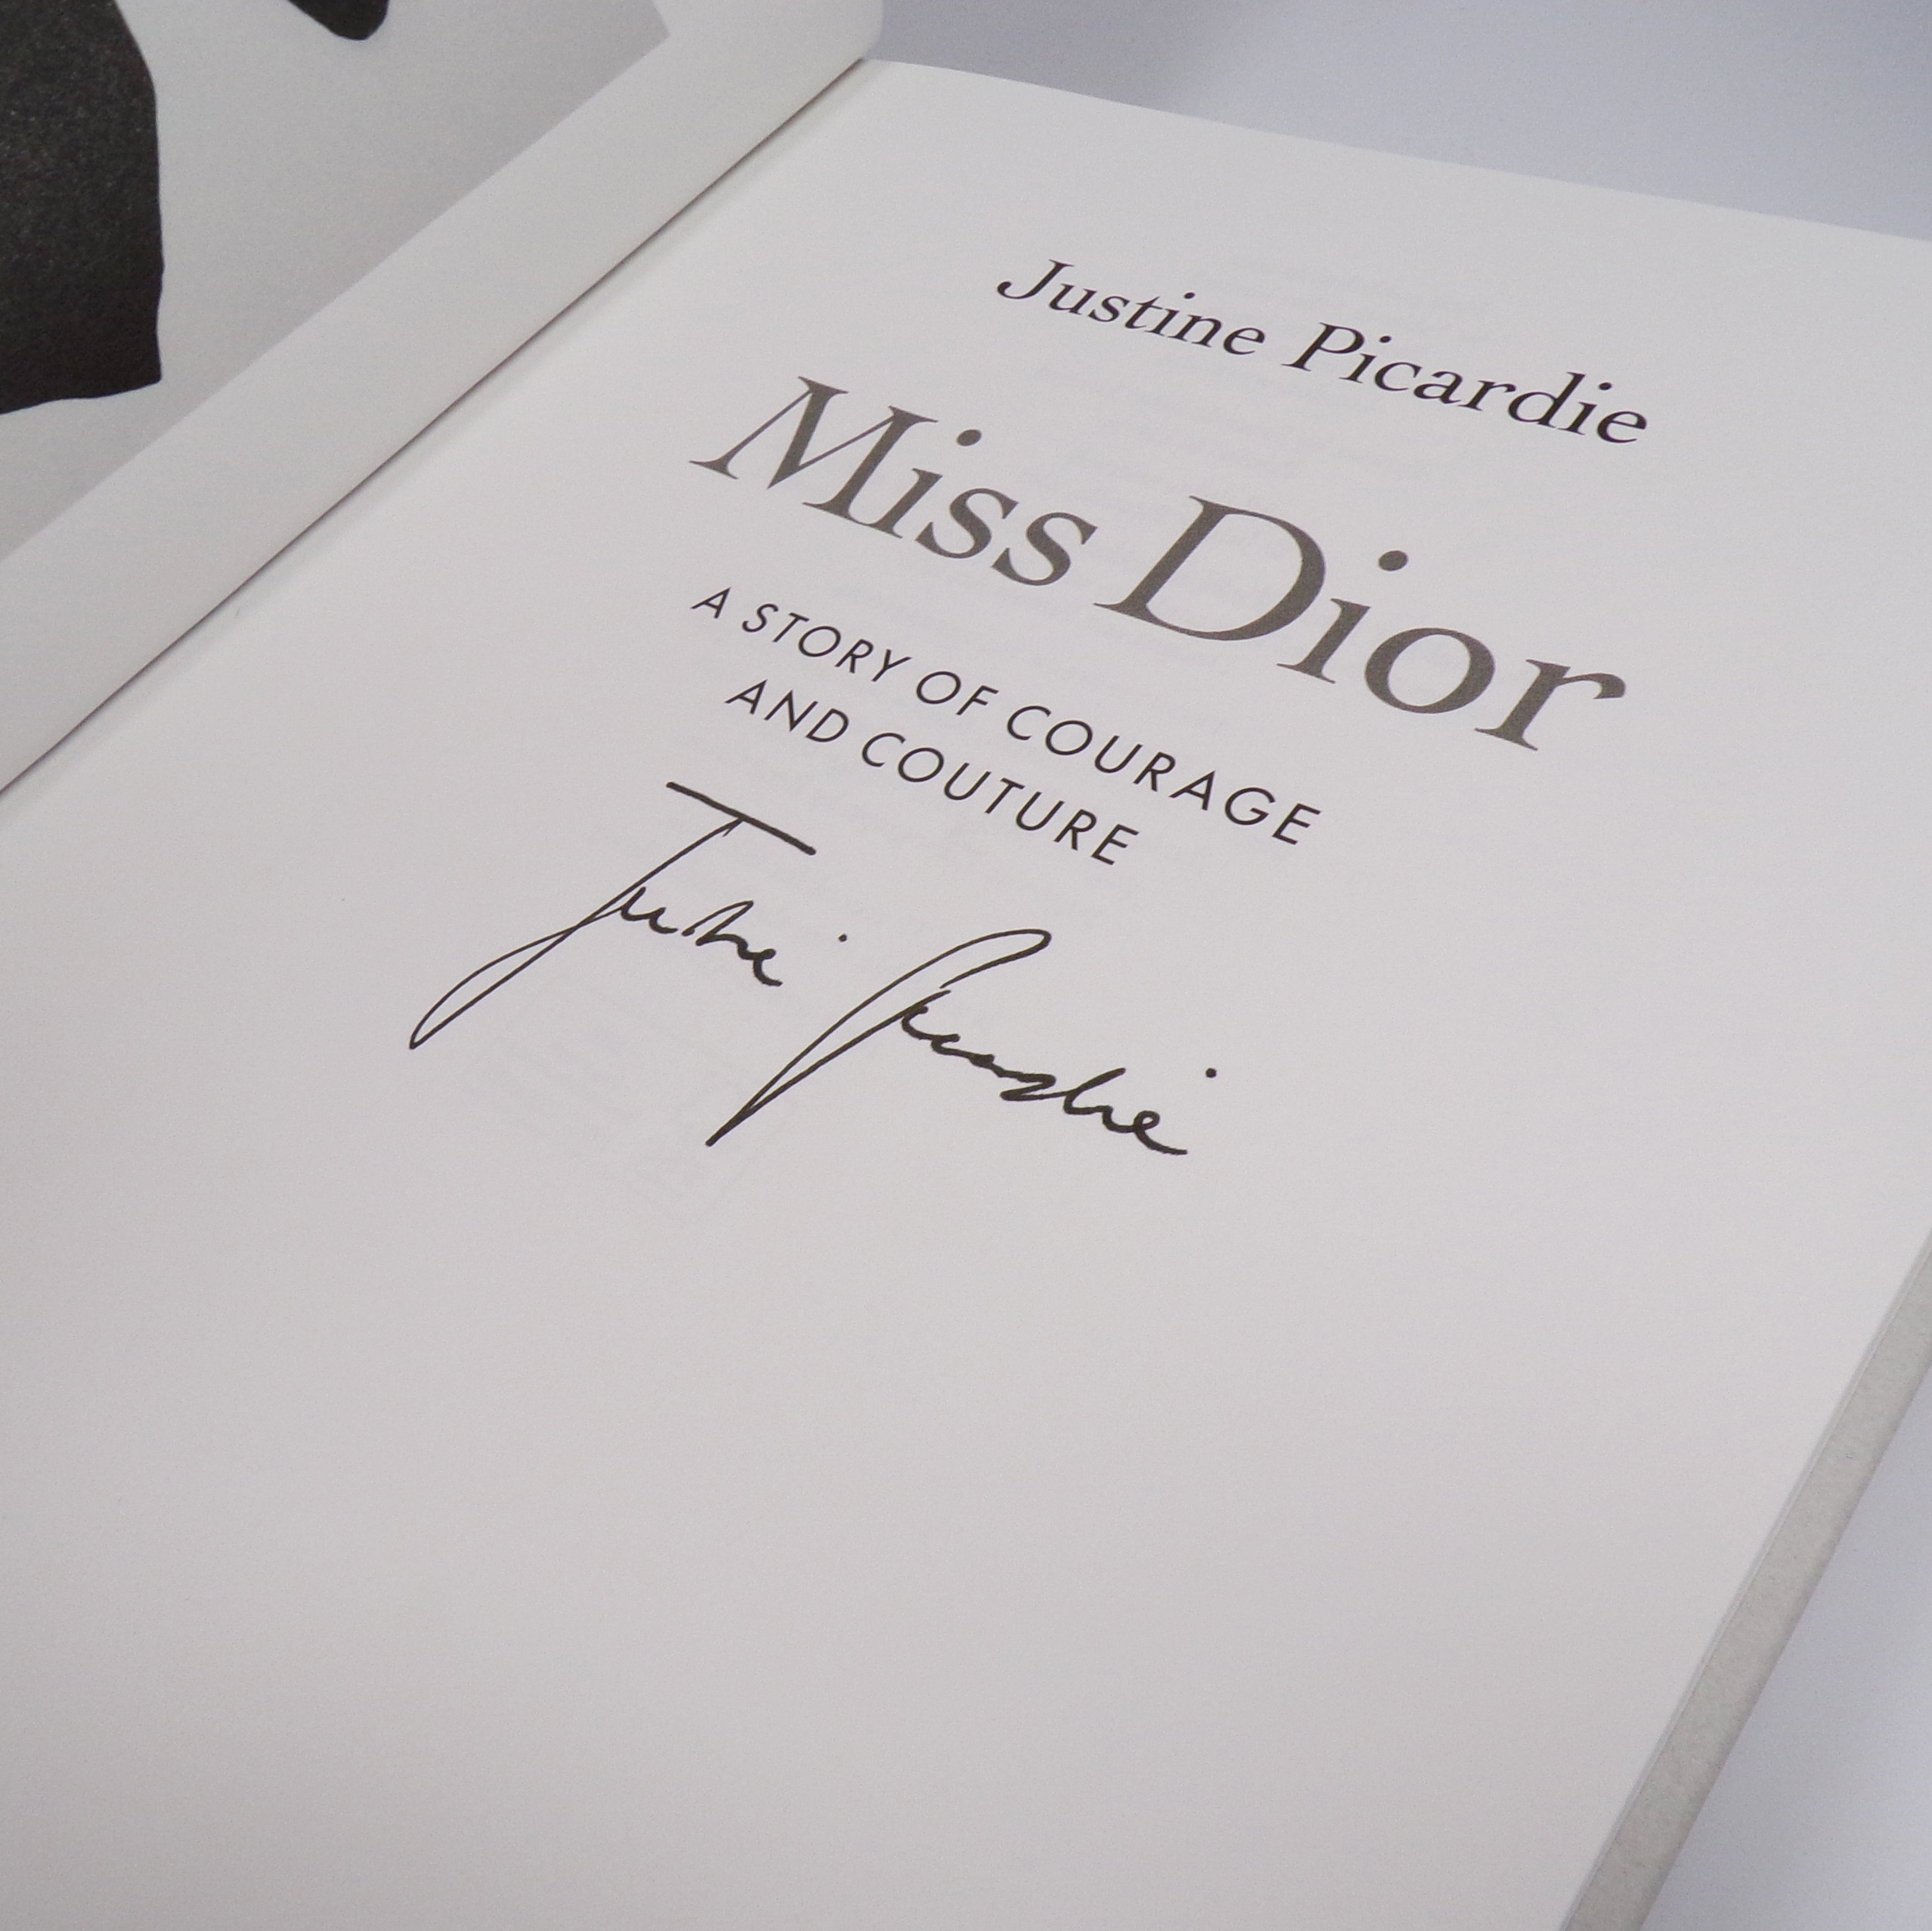 Stream Justine Picardie on the incredible story of Miss Dior by 5x15